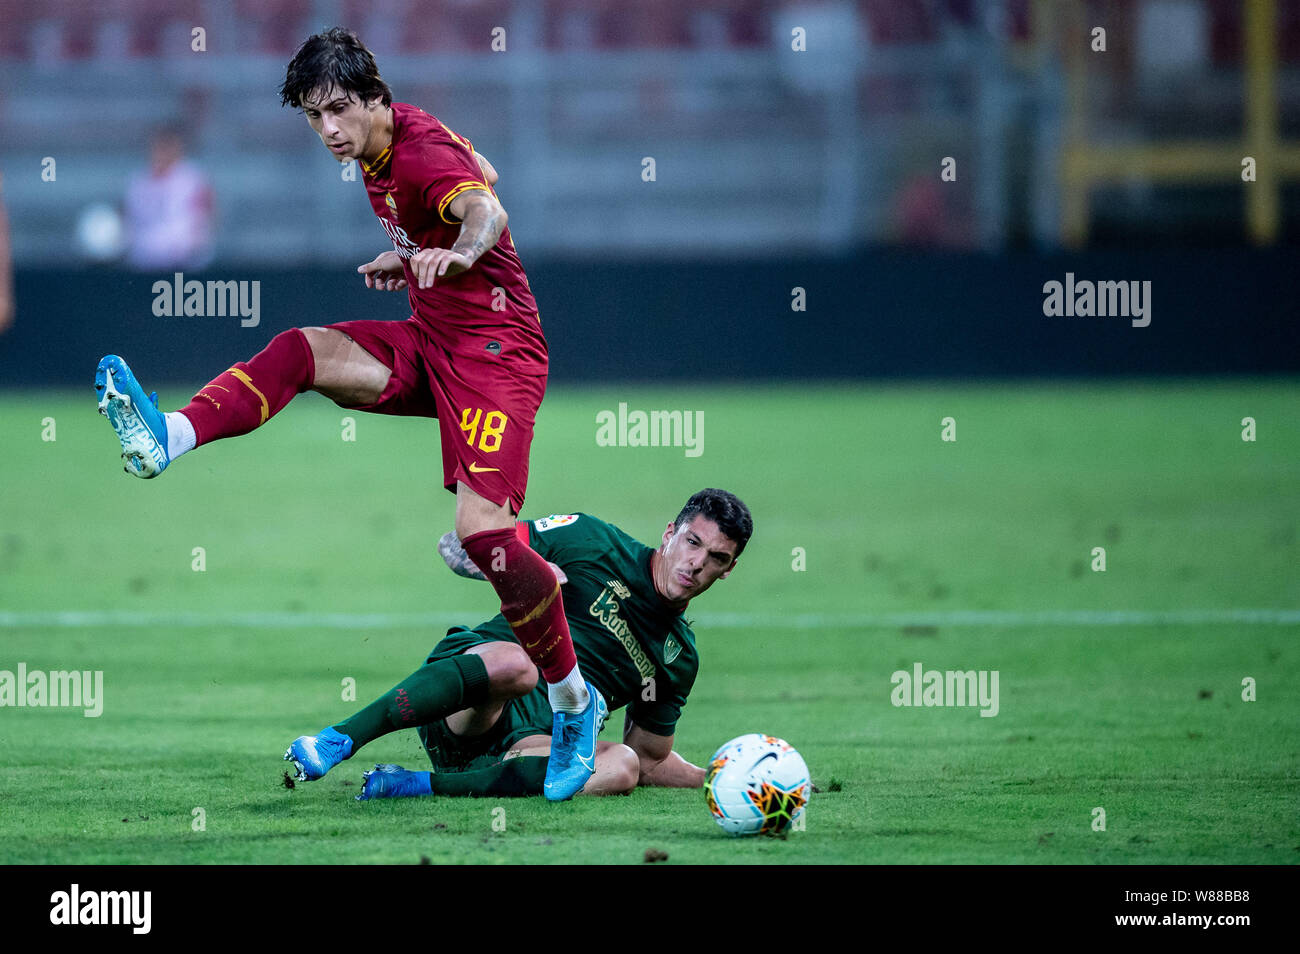 during the pre-season friendly match between AS Roma and Athletic Bilbao at Stadio Renato Curi, Perugia, Italy on 7 August 2019. Photo by Giuseppe Maffia. Stock Photo